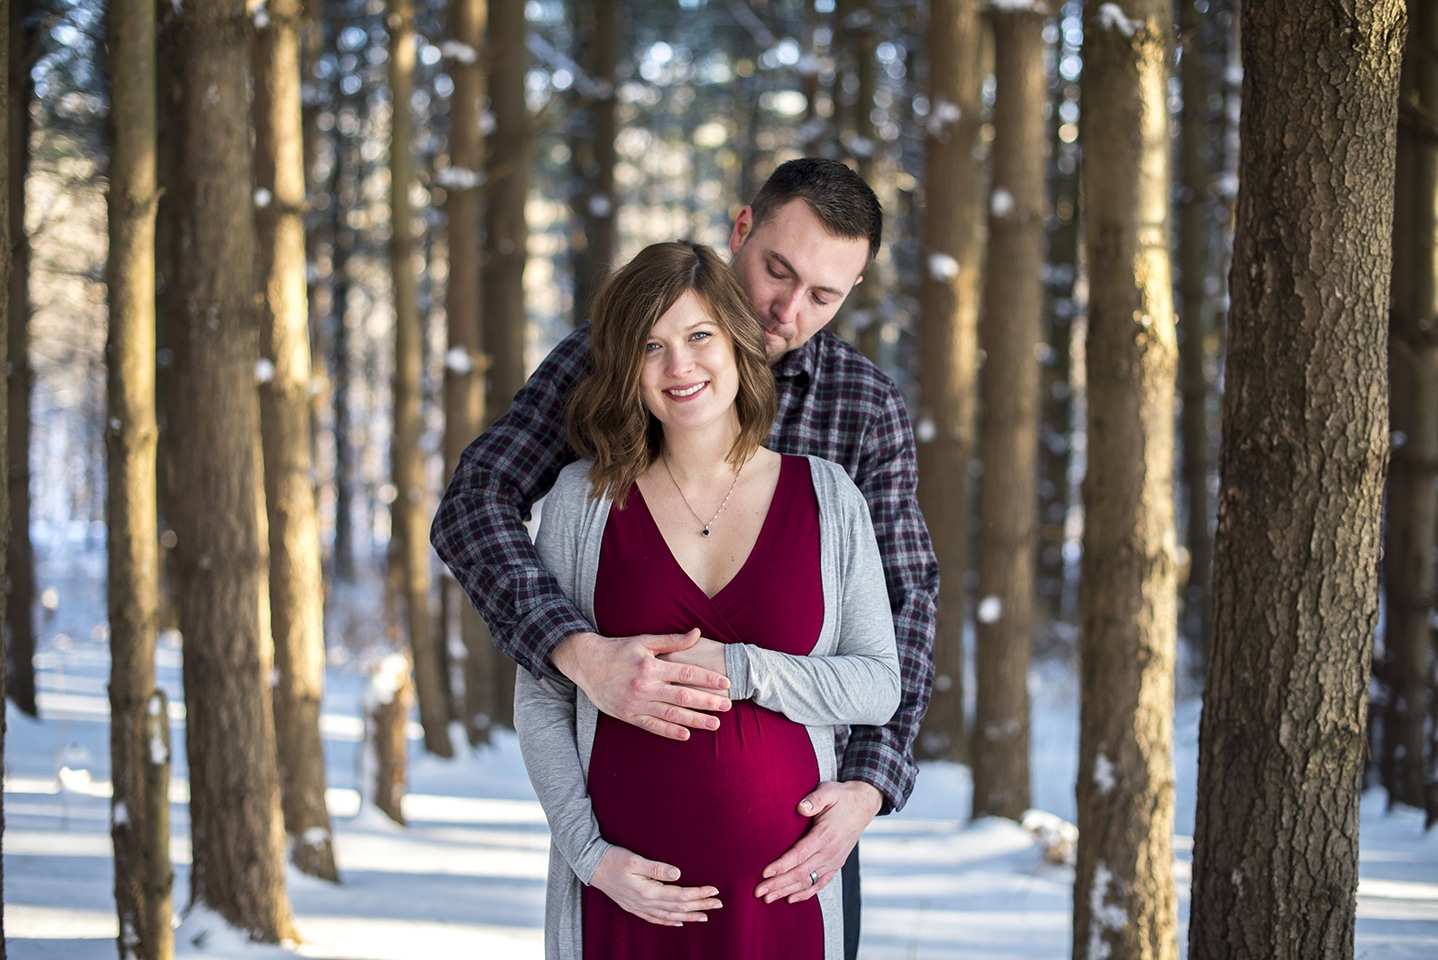 cantrell_maternity_7_23 copy